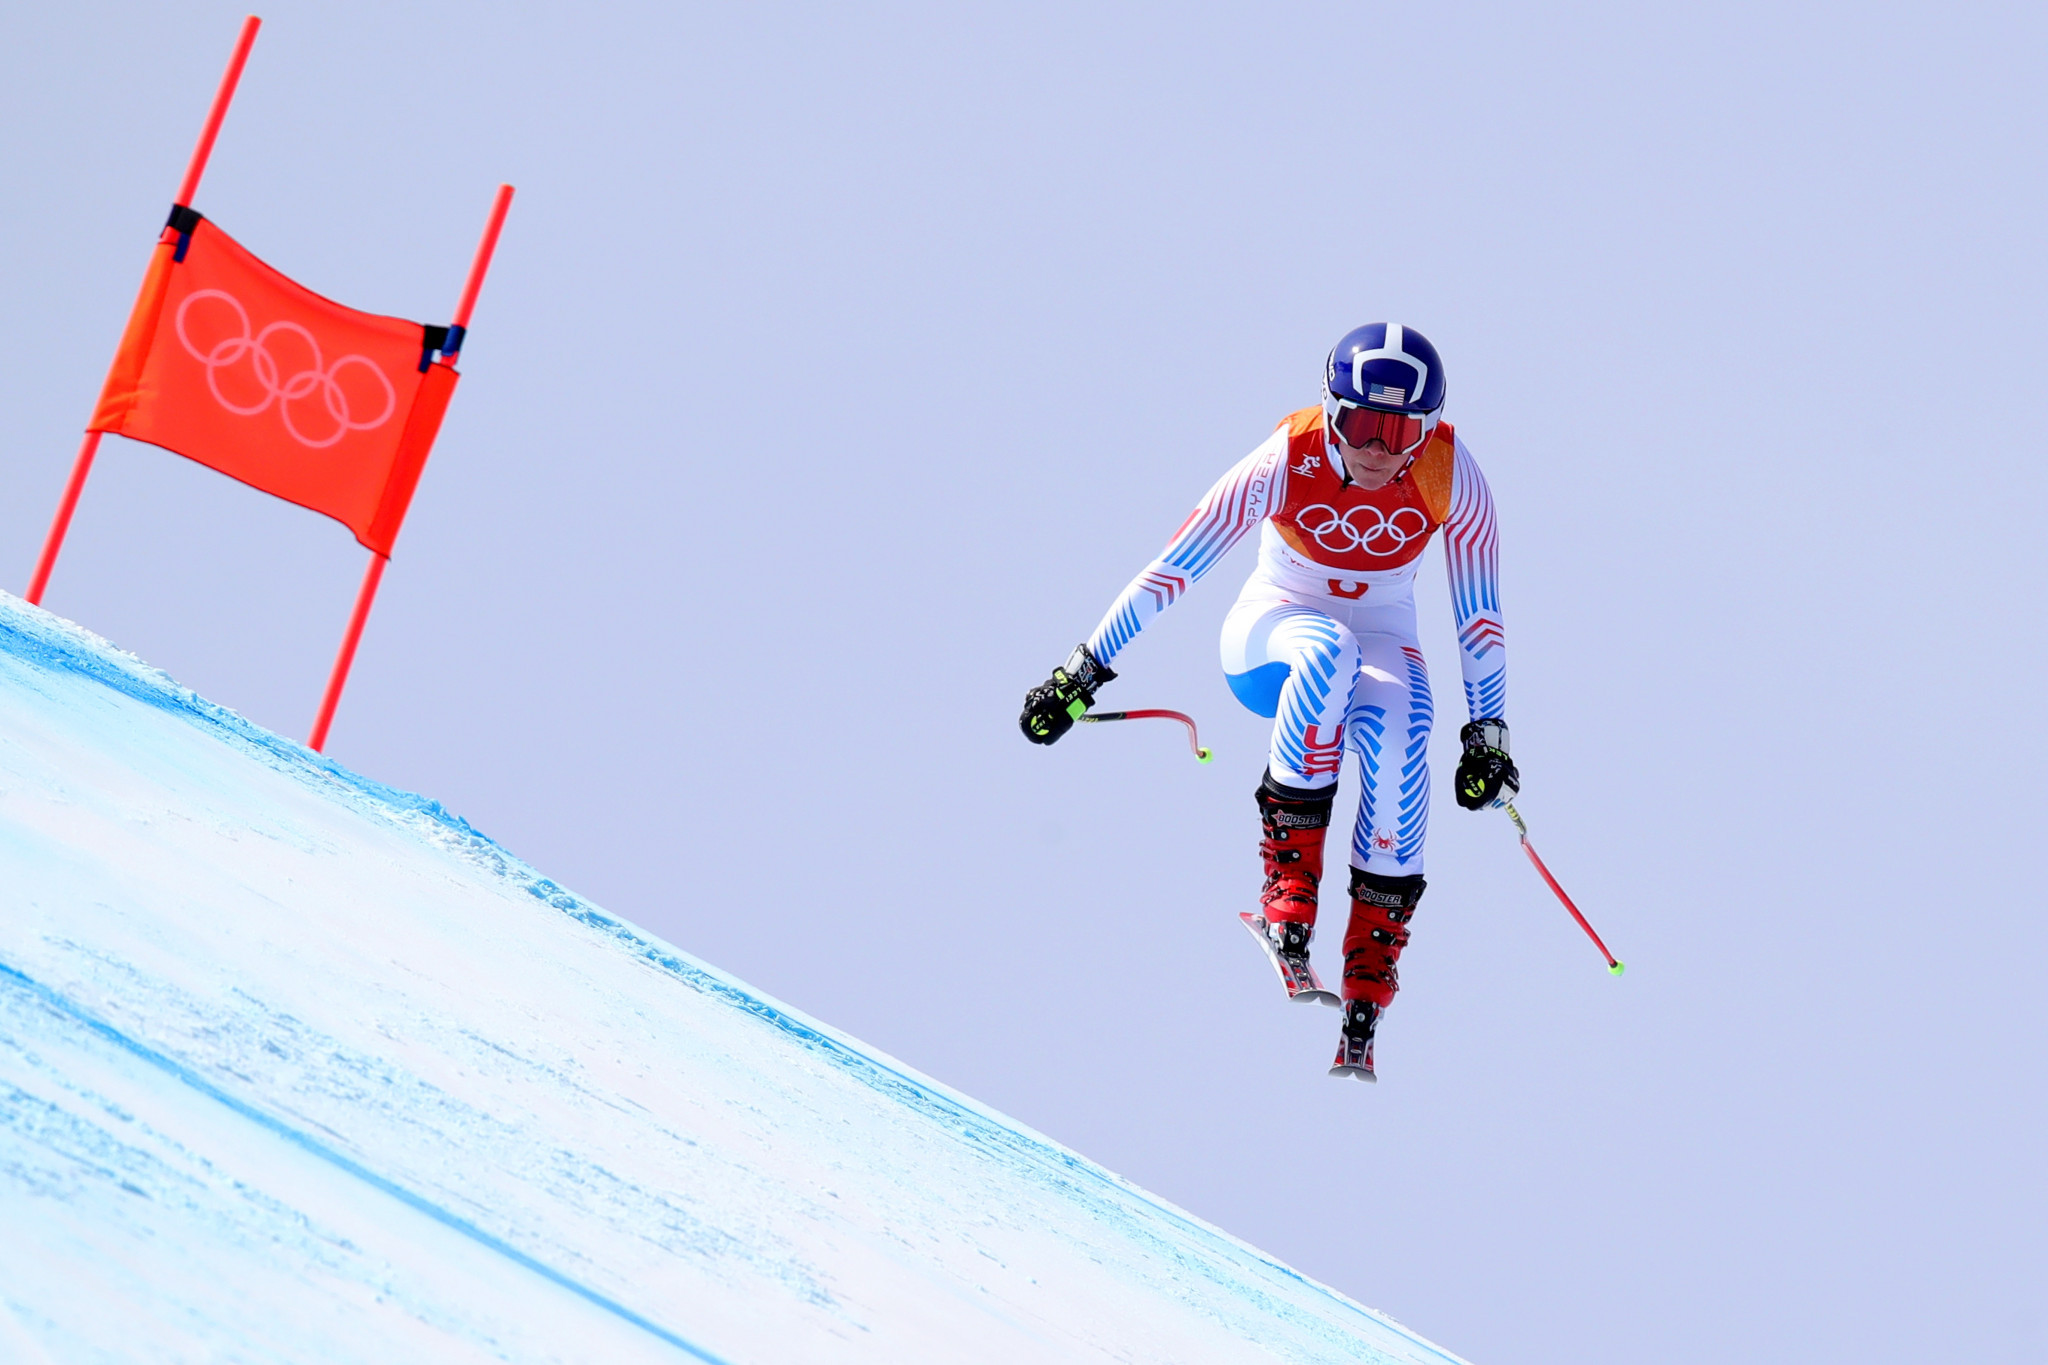 Breezy Johnson finished seventh in the downhill event at the 2018 Winter Olympics in Pyeongchang ©Getty Images